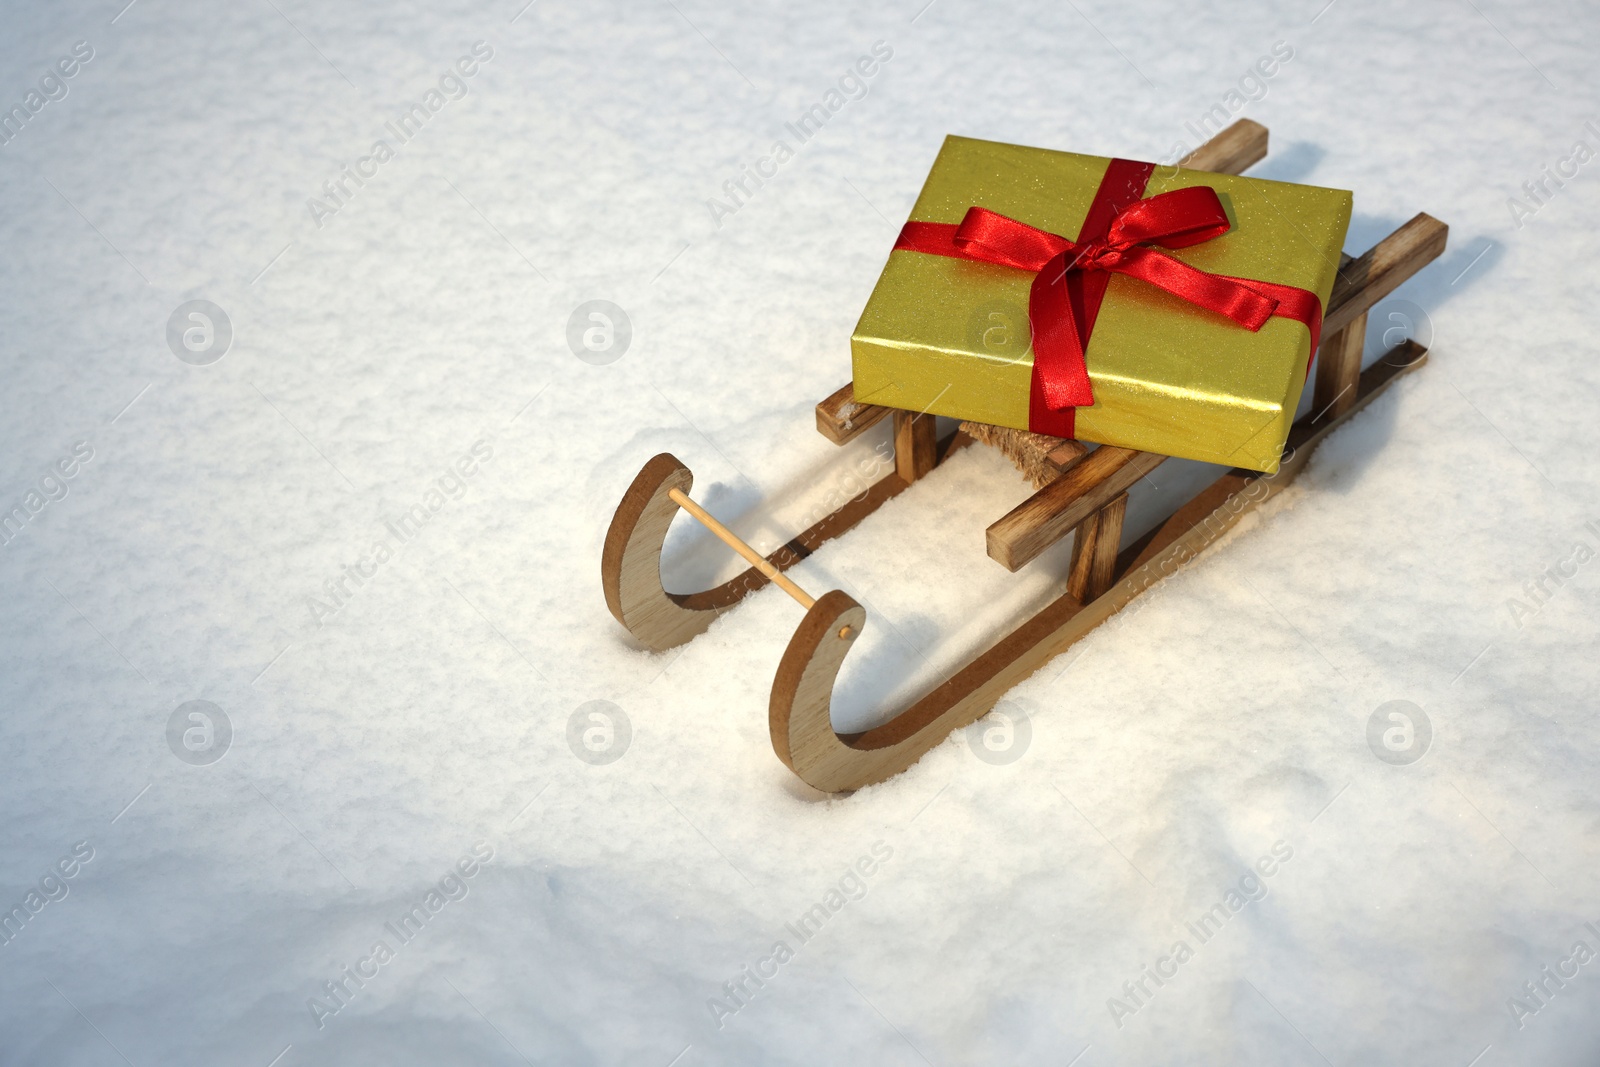 Photo of Wooden sleigh with gift box on snow outdoors. Space for text